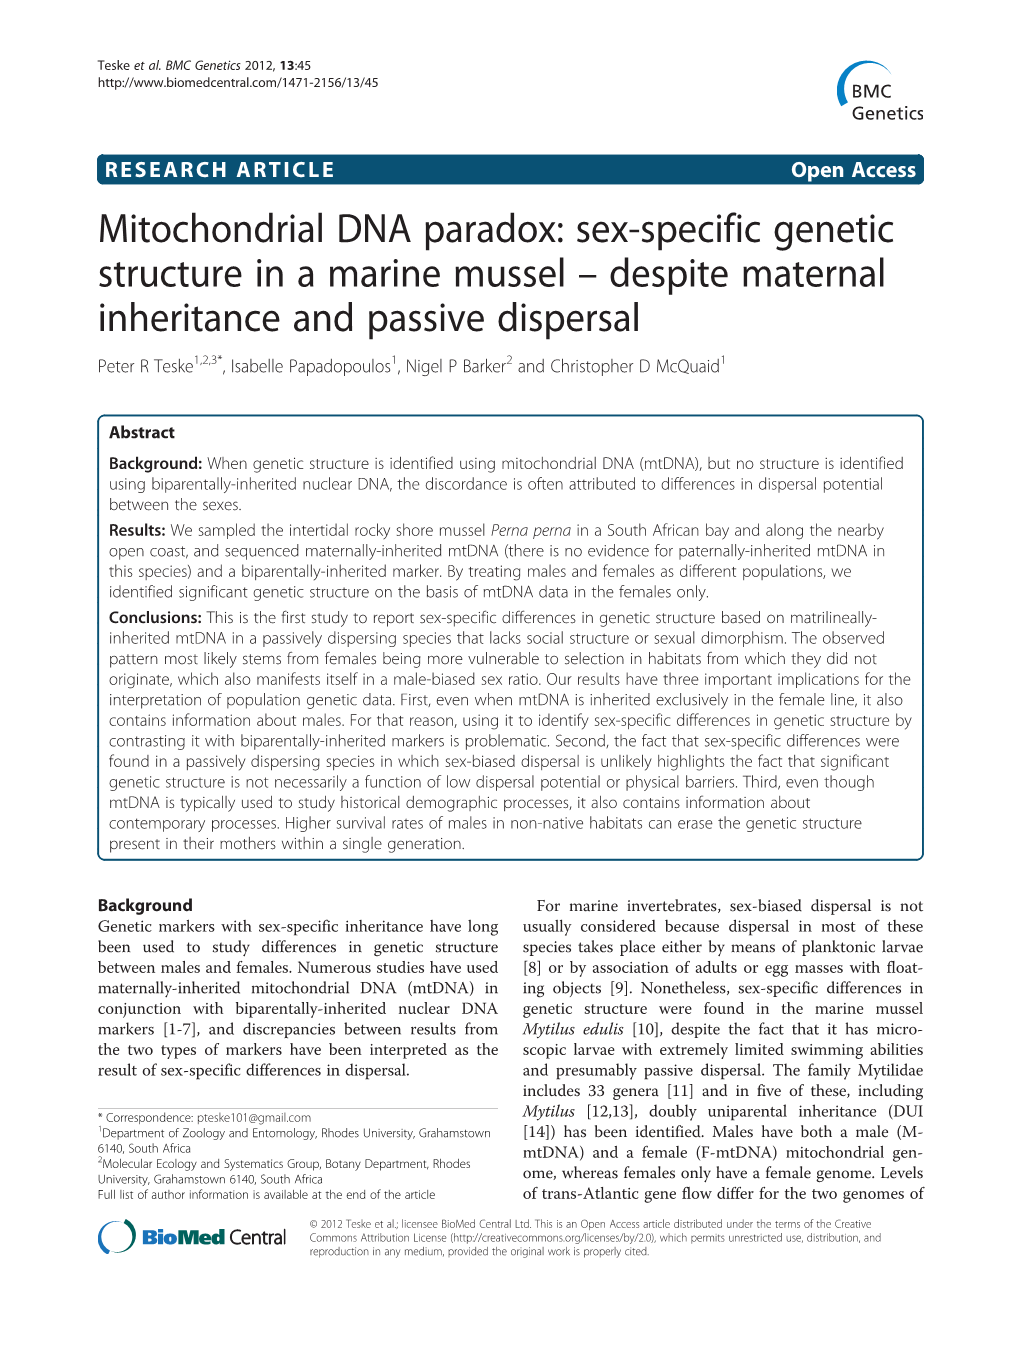 Sex-Specific Genetic Structure in a Marine Mussel